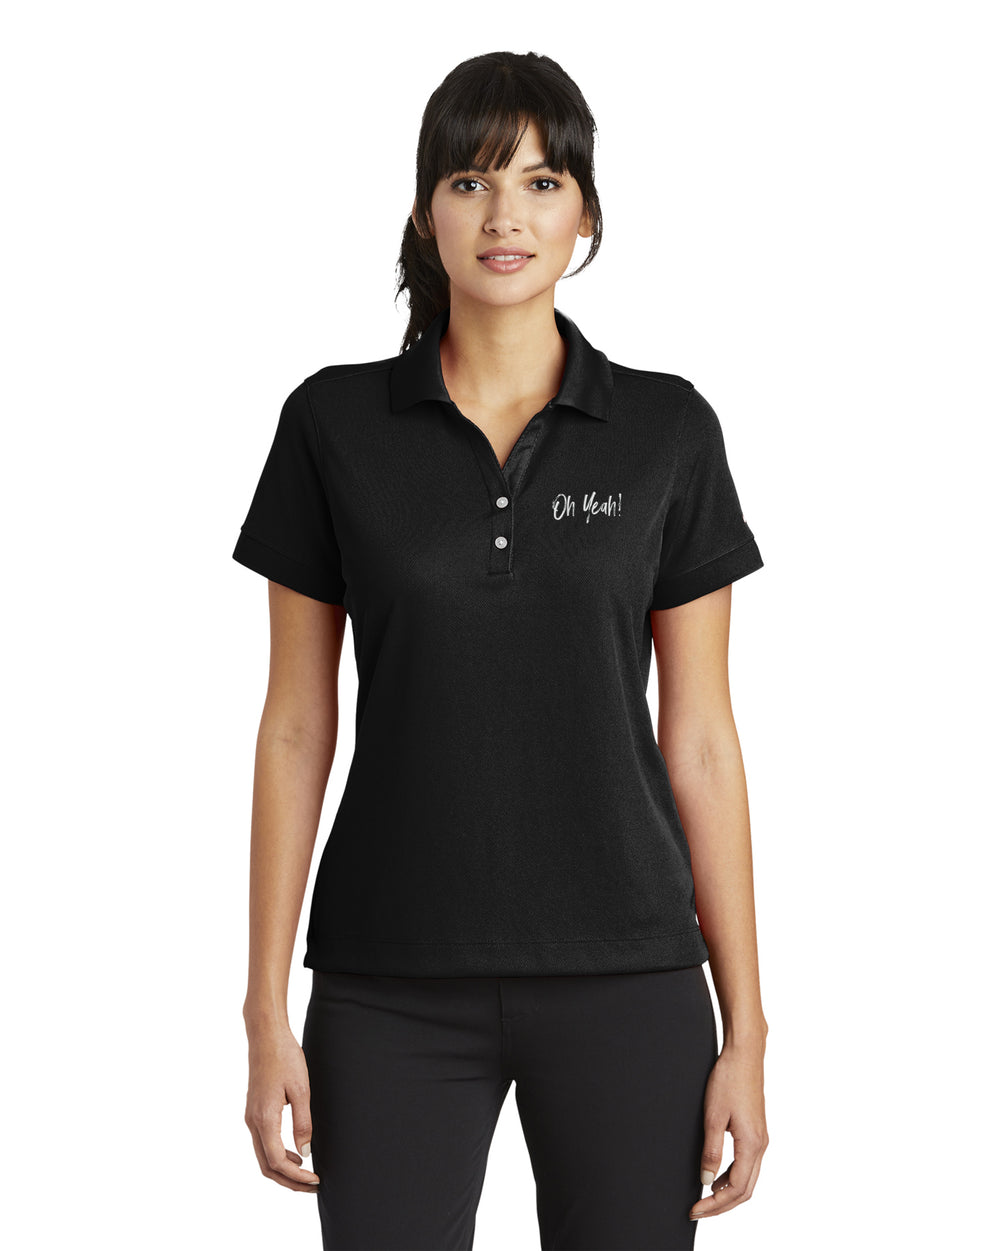 Oh Yeah - Nike Ladies Dri-FIT Classic Polo - 286772